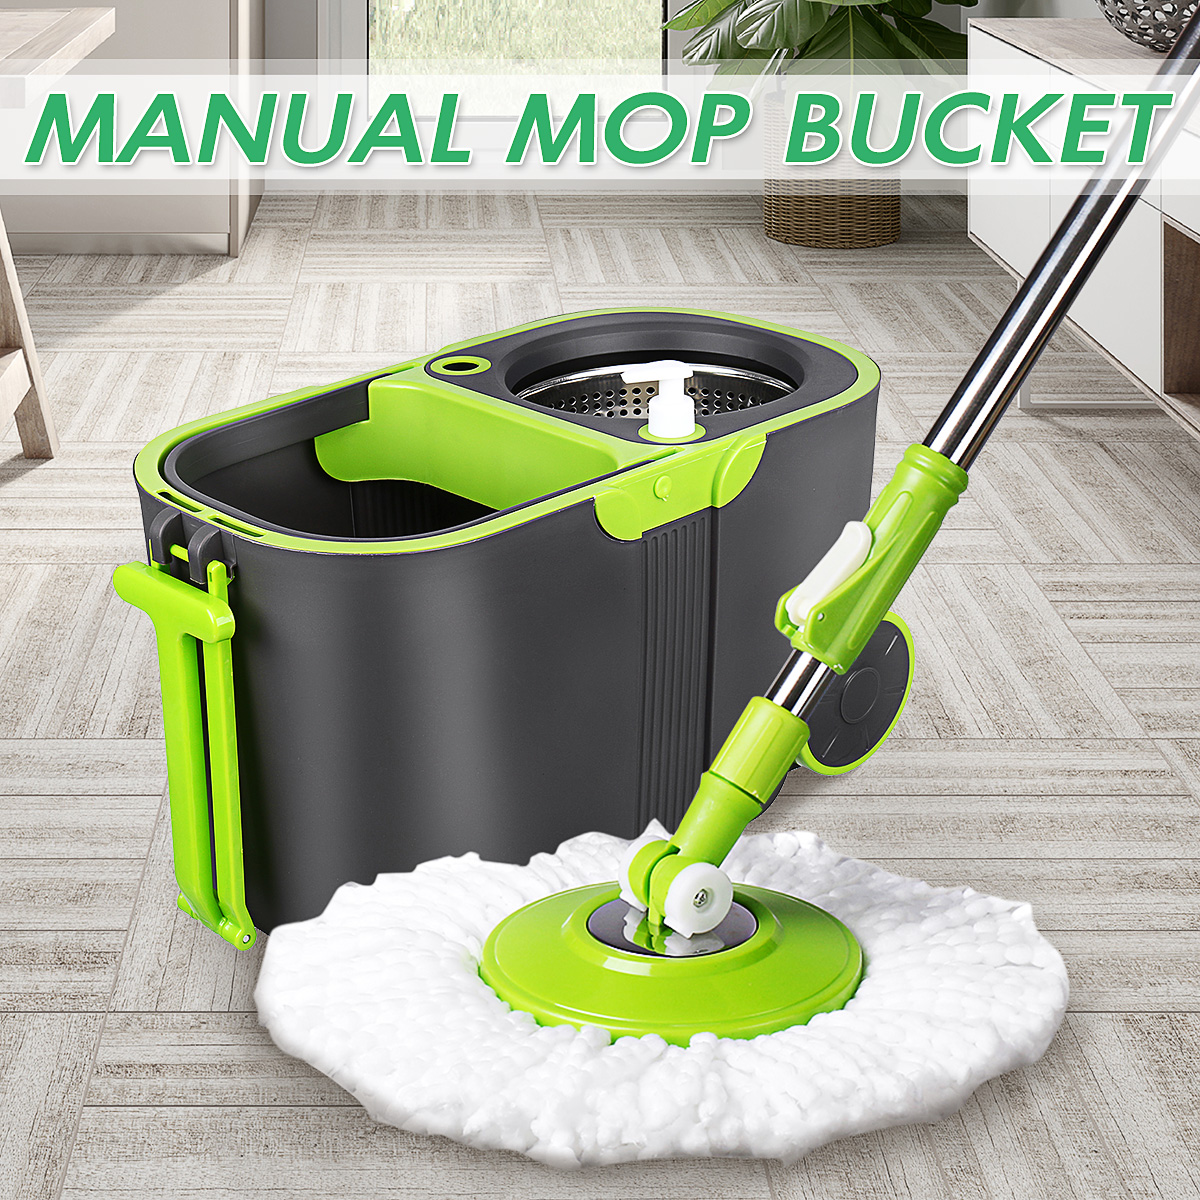 360-Degree-Spin-Floor-Mop-Rotating-Bucket-Set-With-Wheels-Home-Cleaning-Tools-1523309-1